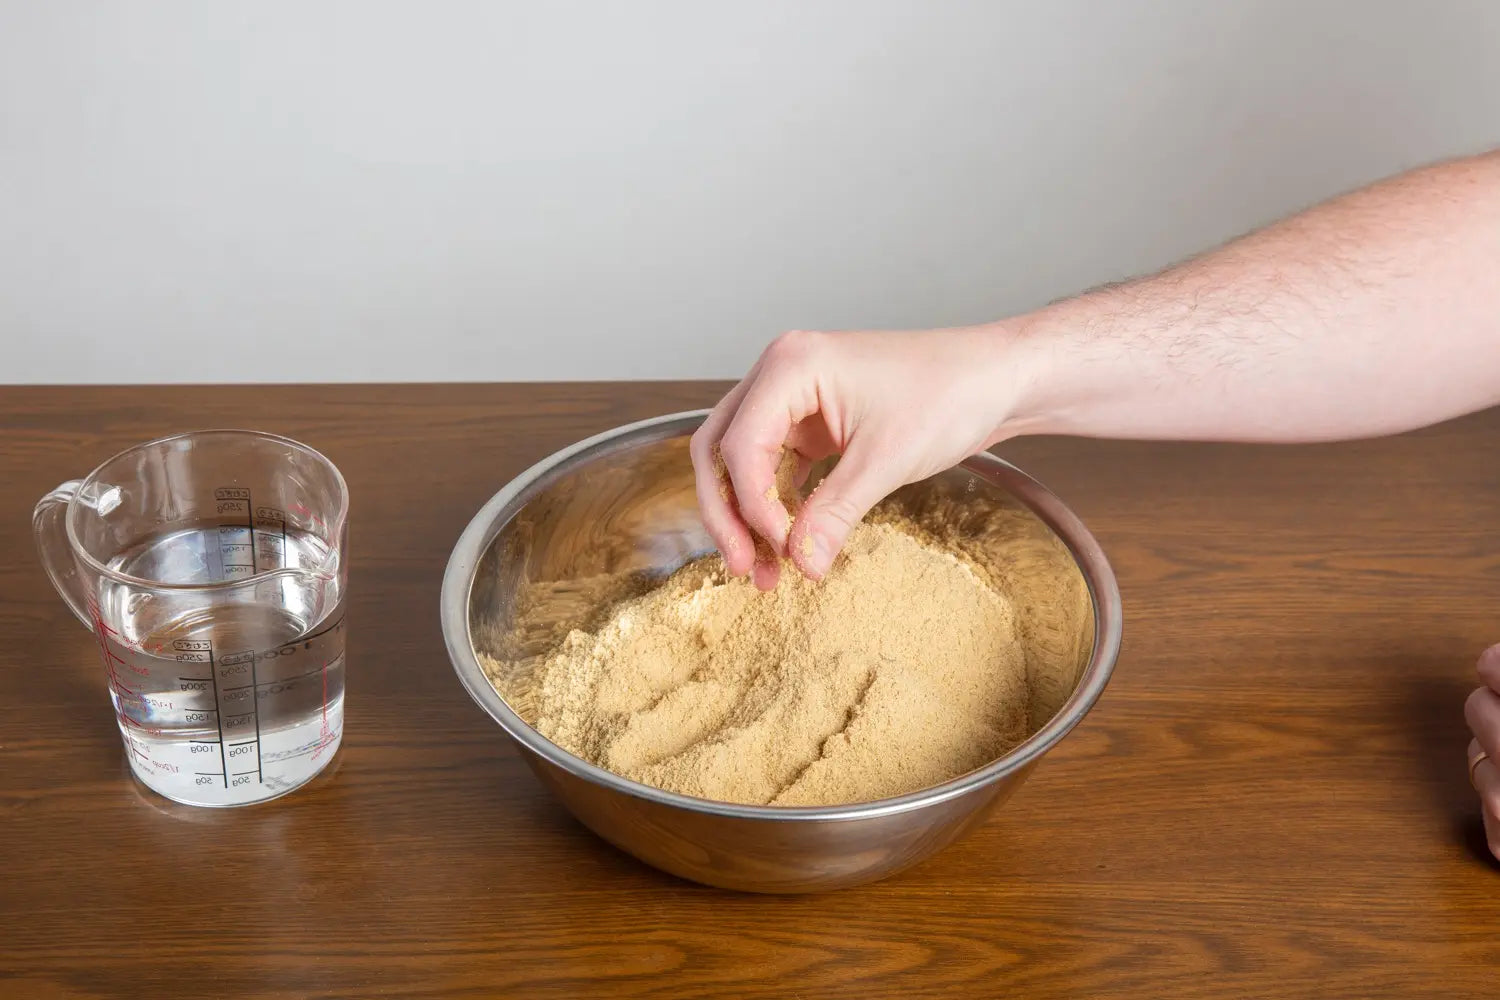 Place the rice bran, salt, and other dry ingredients in a large bowl and mix.